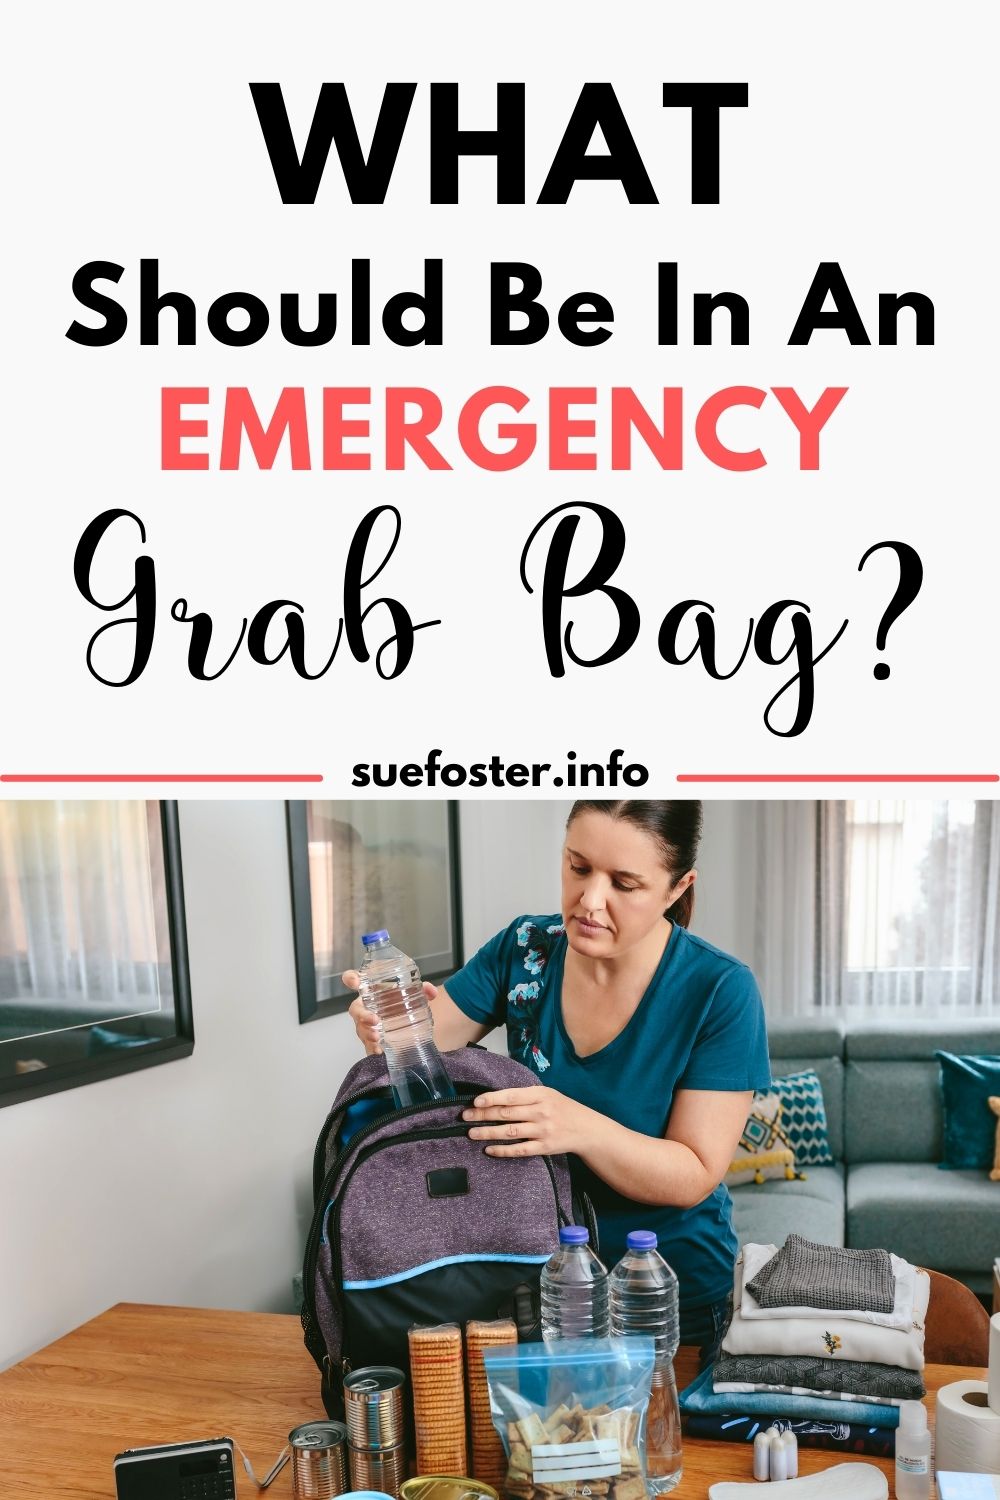 Emergency grab bags/bug out bags are designed to be used in emergencies. They are usually small and light enough to carry with you at all times, but, what should be in an emergency grab bag?